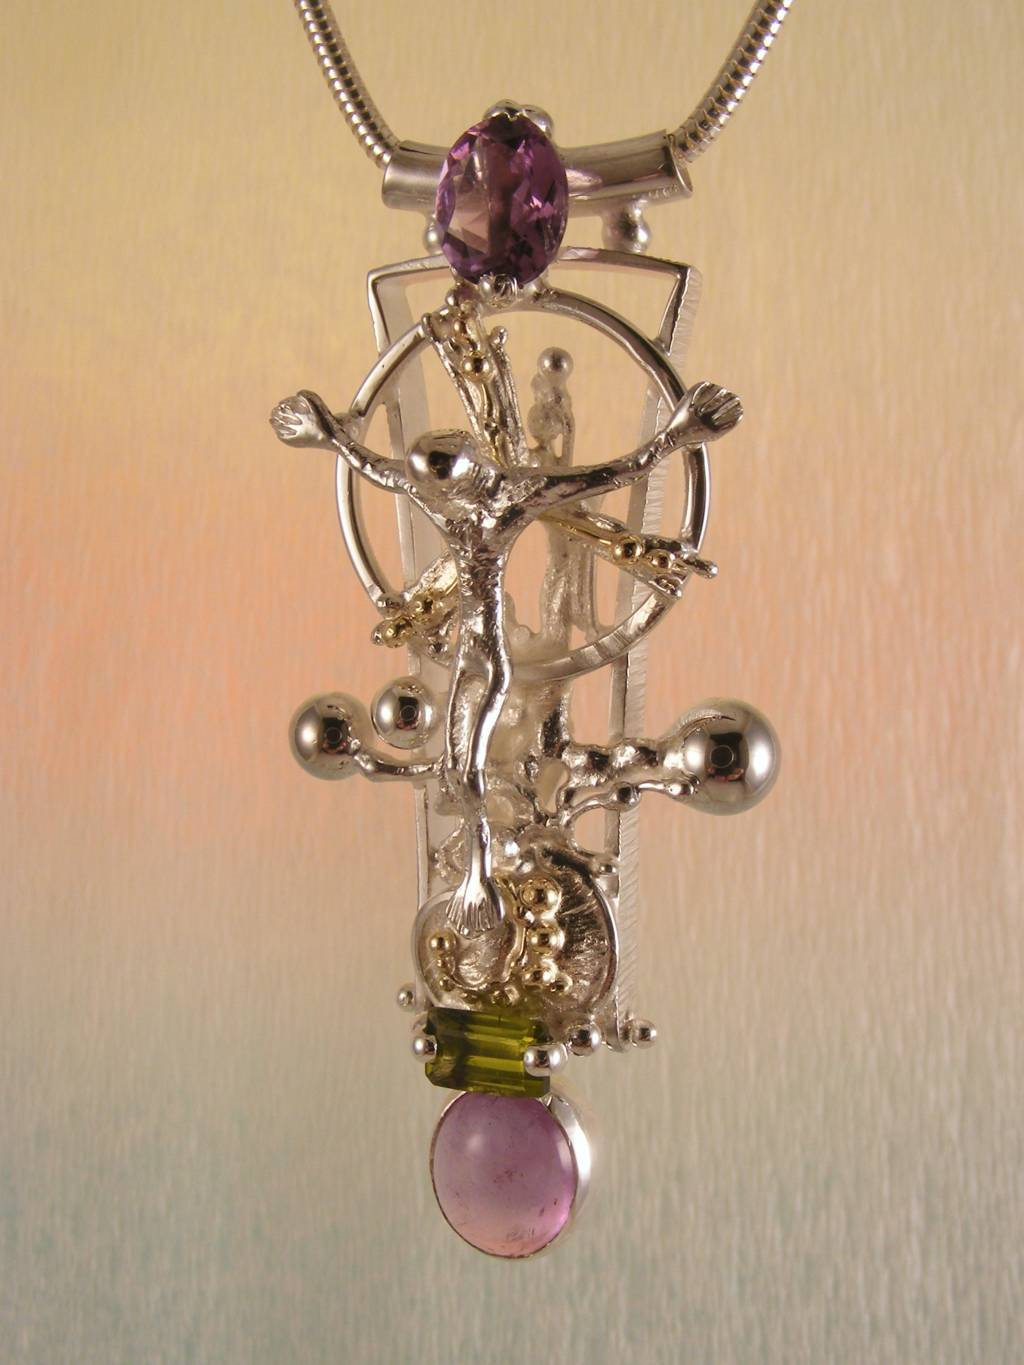 gregory pyra piro sculptural pendant 3050, mixed metal silver and gold pendant, pendants in art and craft galleries, sculptural pendant with amethyst and peridot